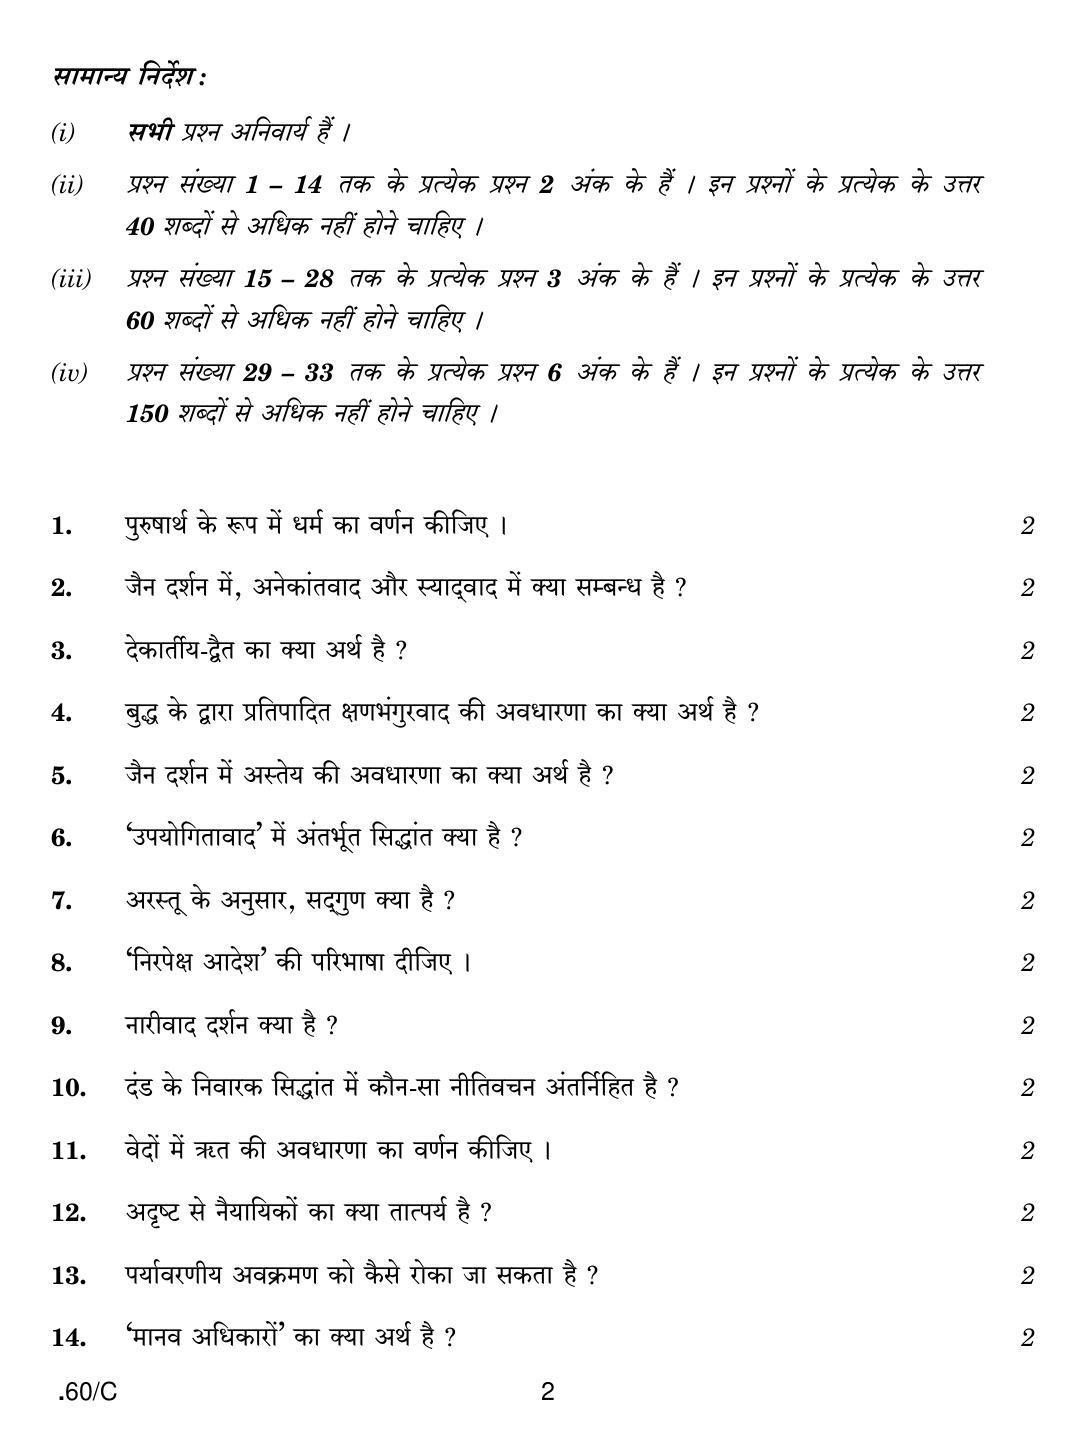 CBSE Class 12 Philosophy 2020 Compartment Question Paper - Page 2